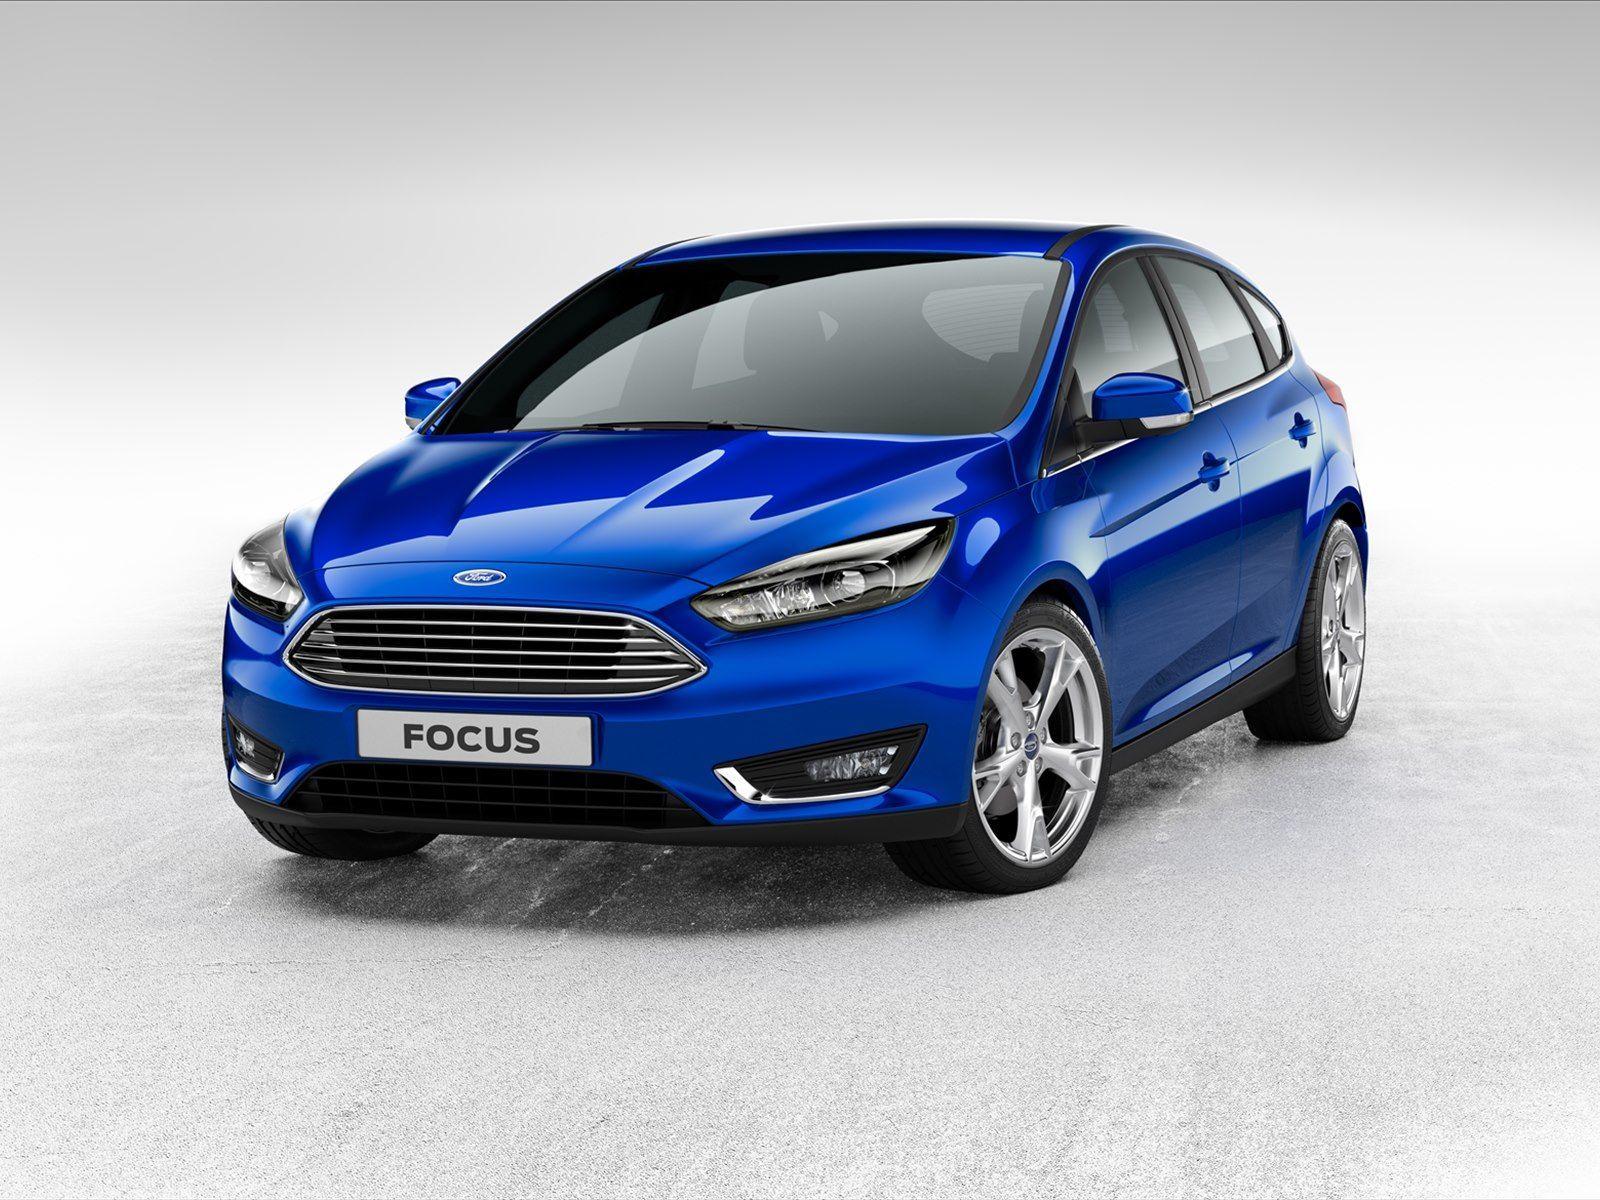 HD 2015 Ford Focus Wallpaper HD WALLPAPERS